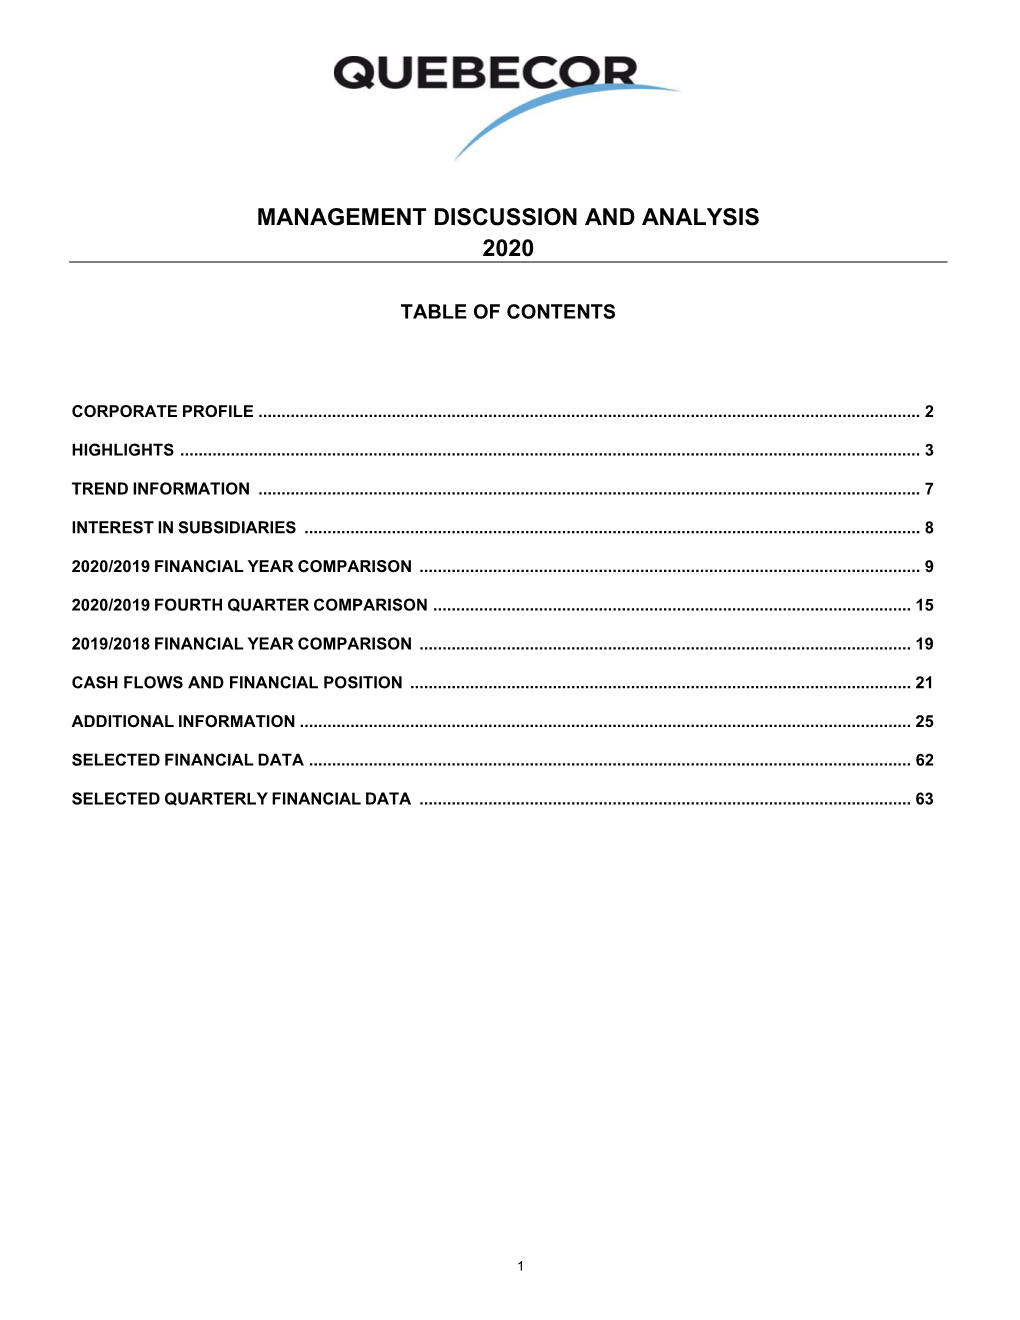 Management Discussion and Analysis 2020